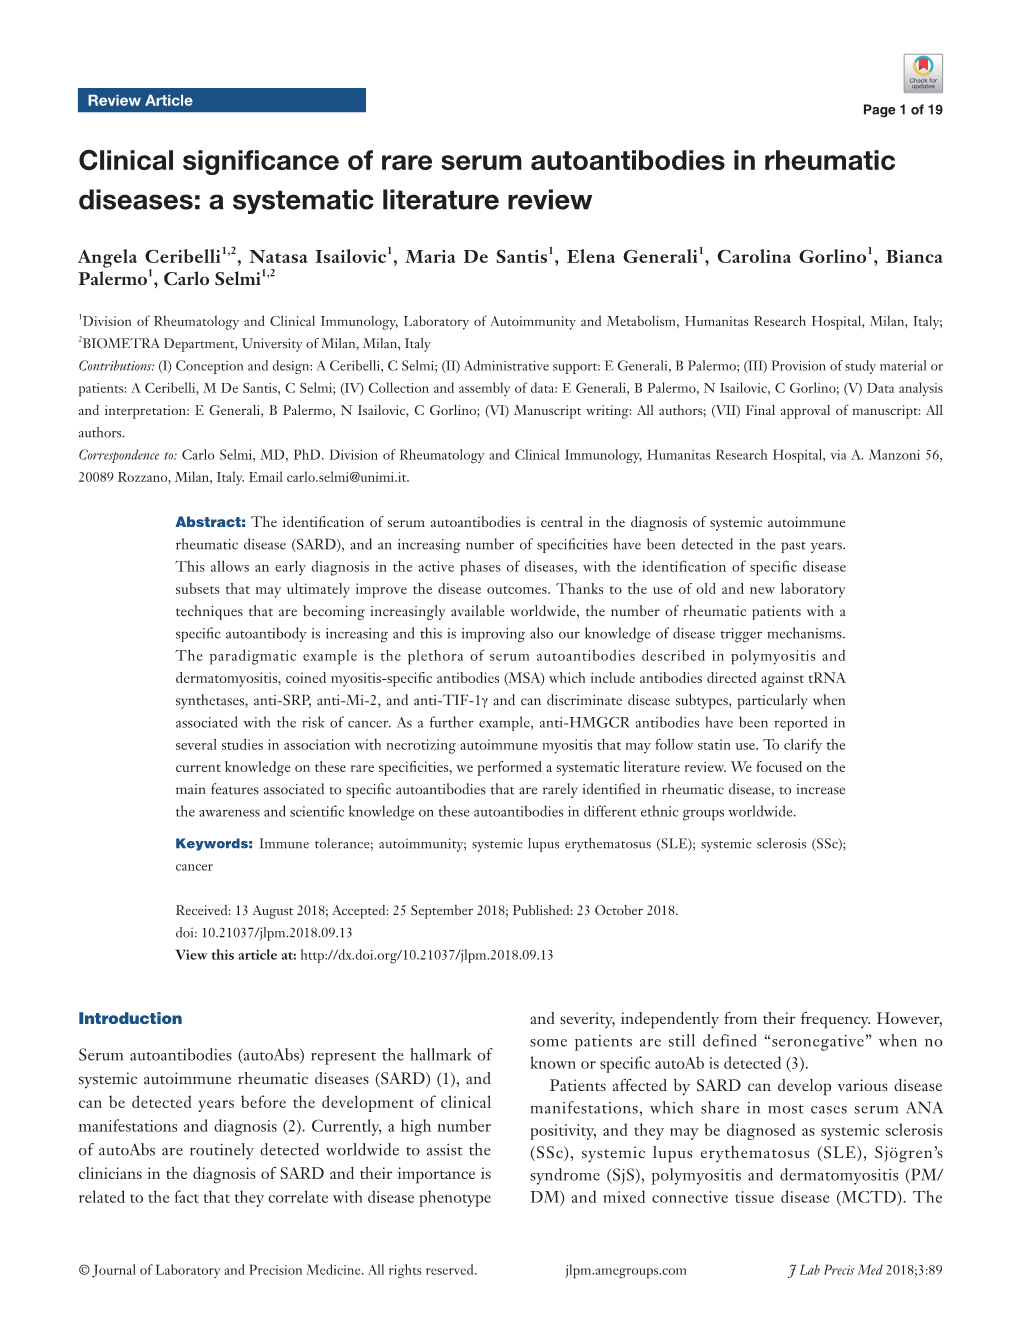 Clinical Significance of Rare Serum Autoantibodies in Rheumatic Diseases: a Systematic Literature Review